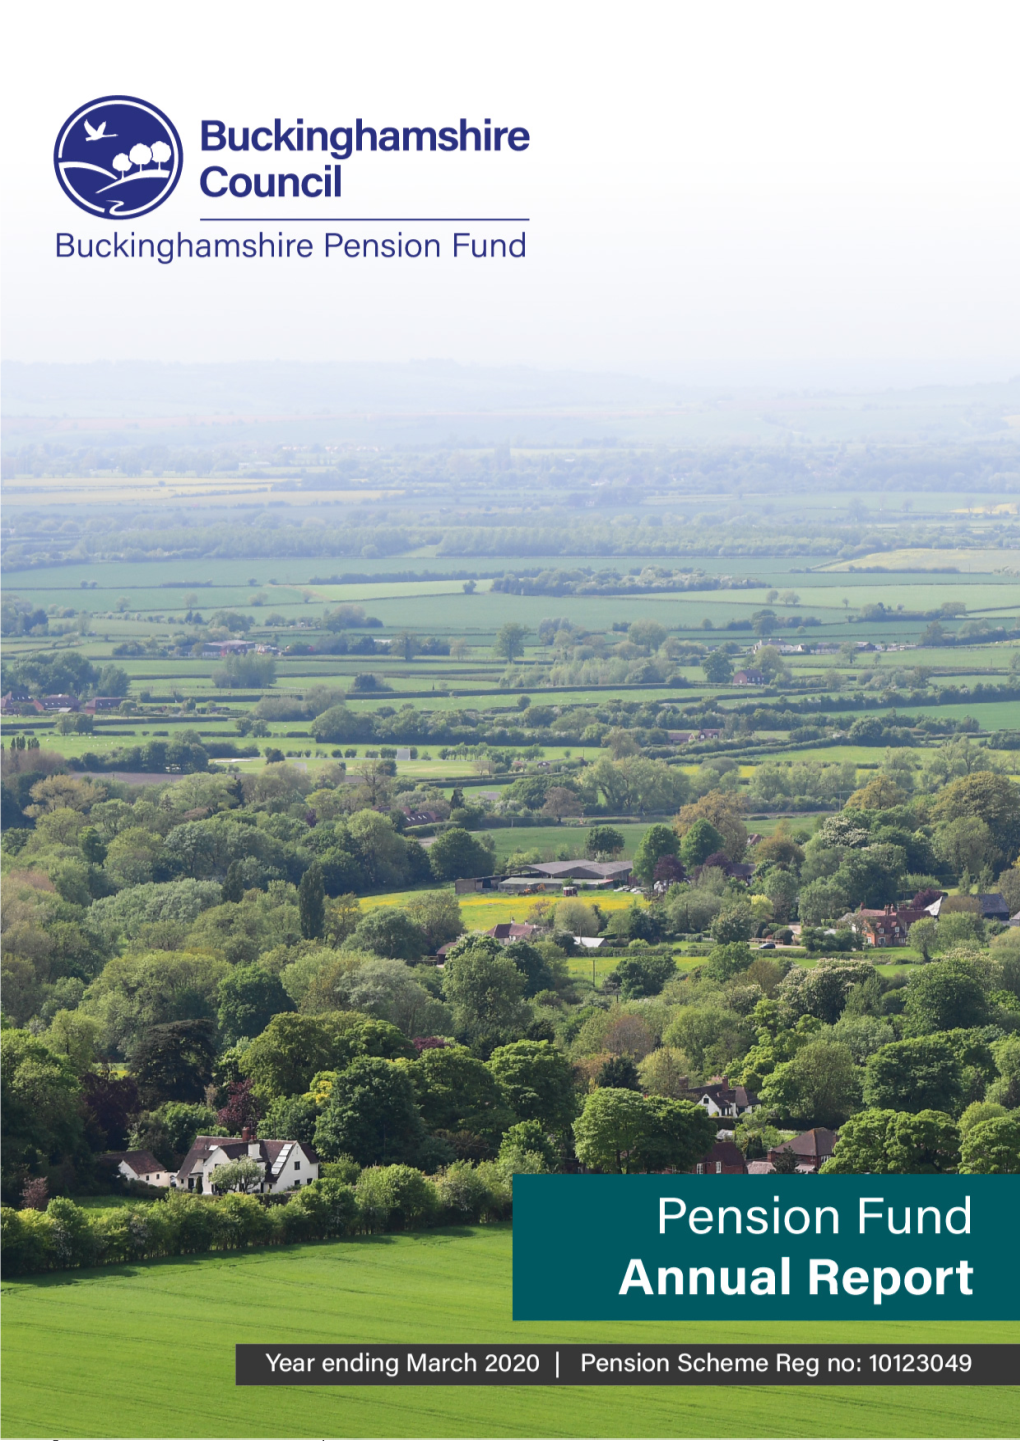 Buckinghamshire Pension Fund Annual Repot